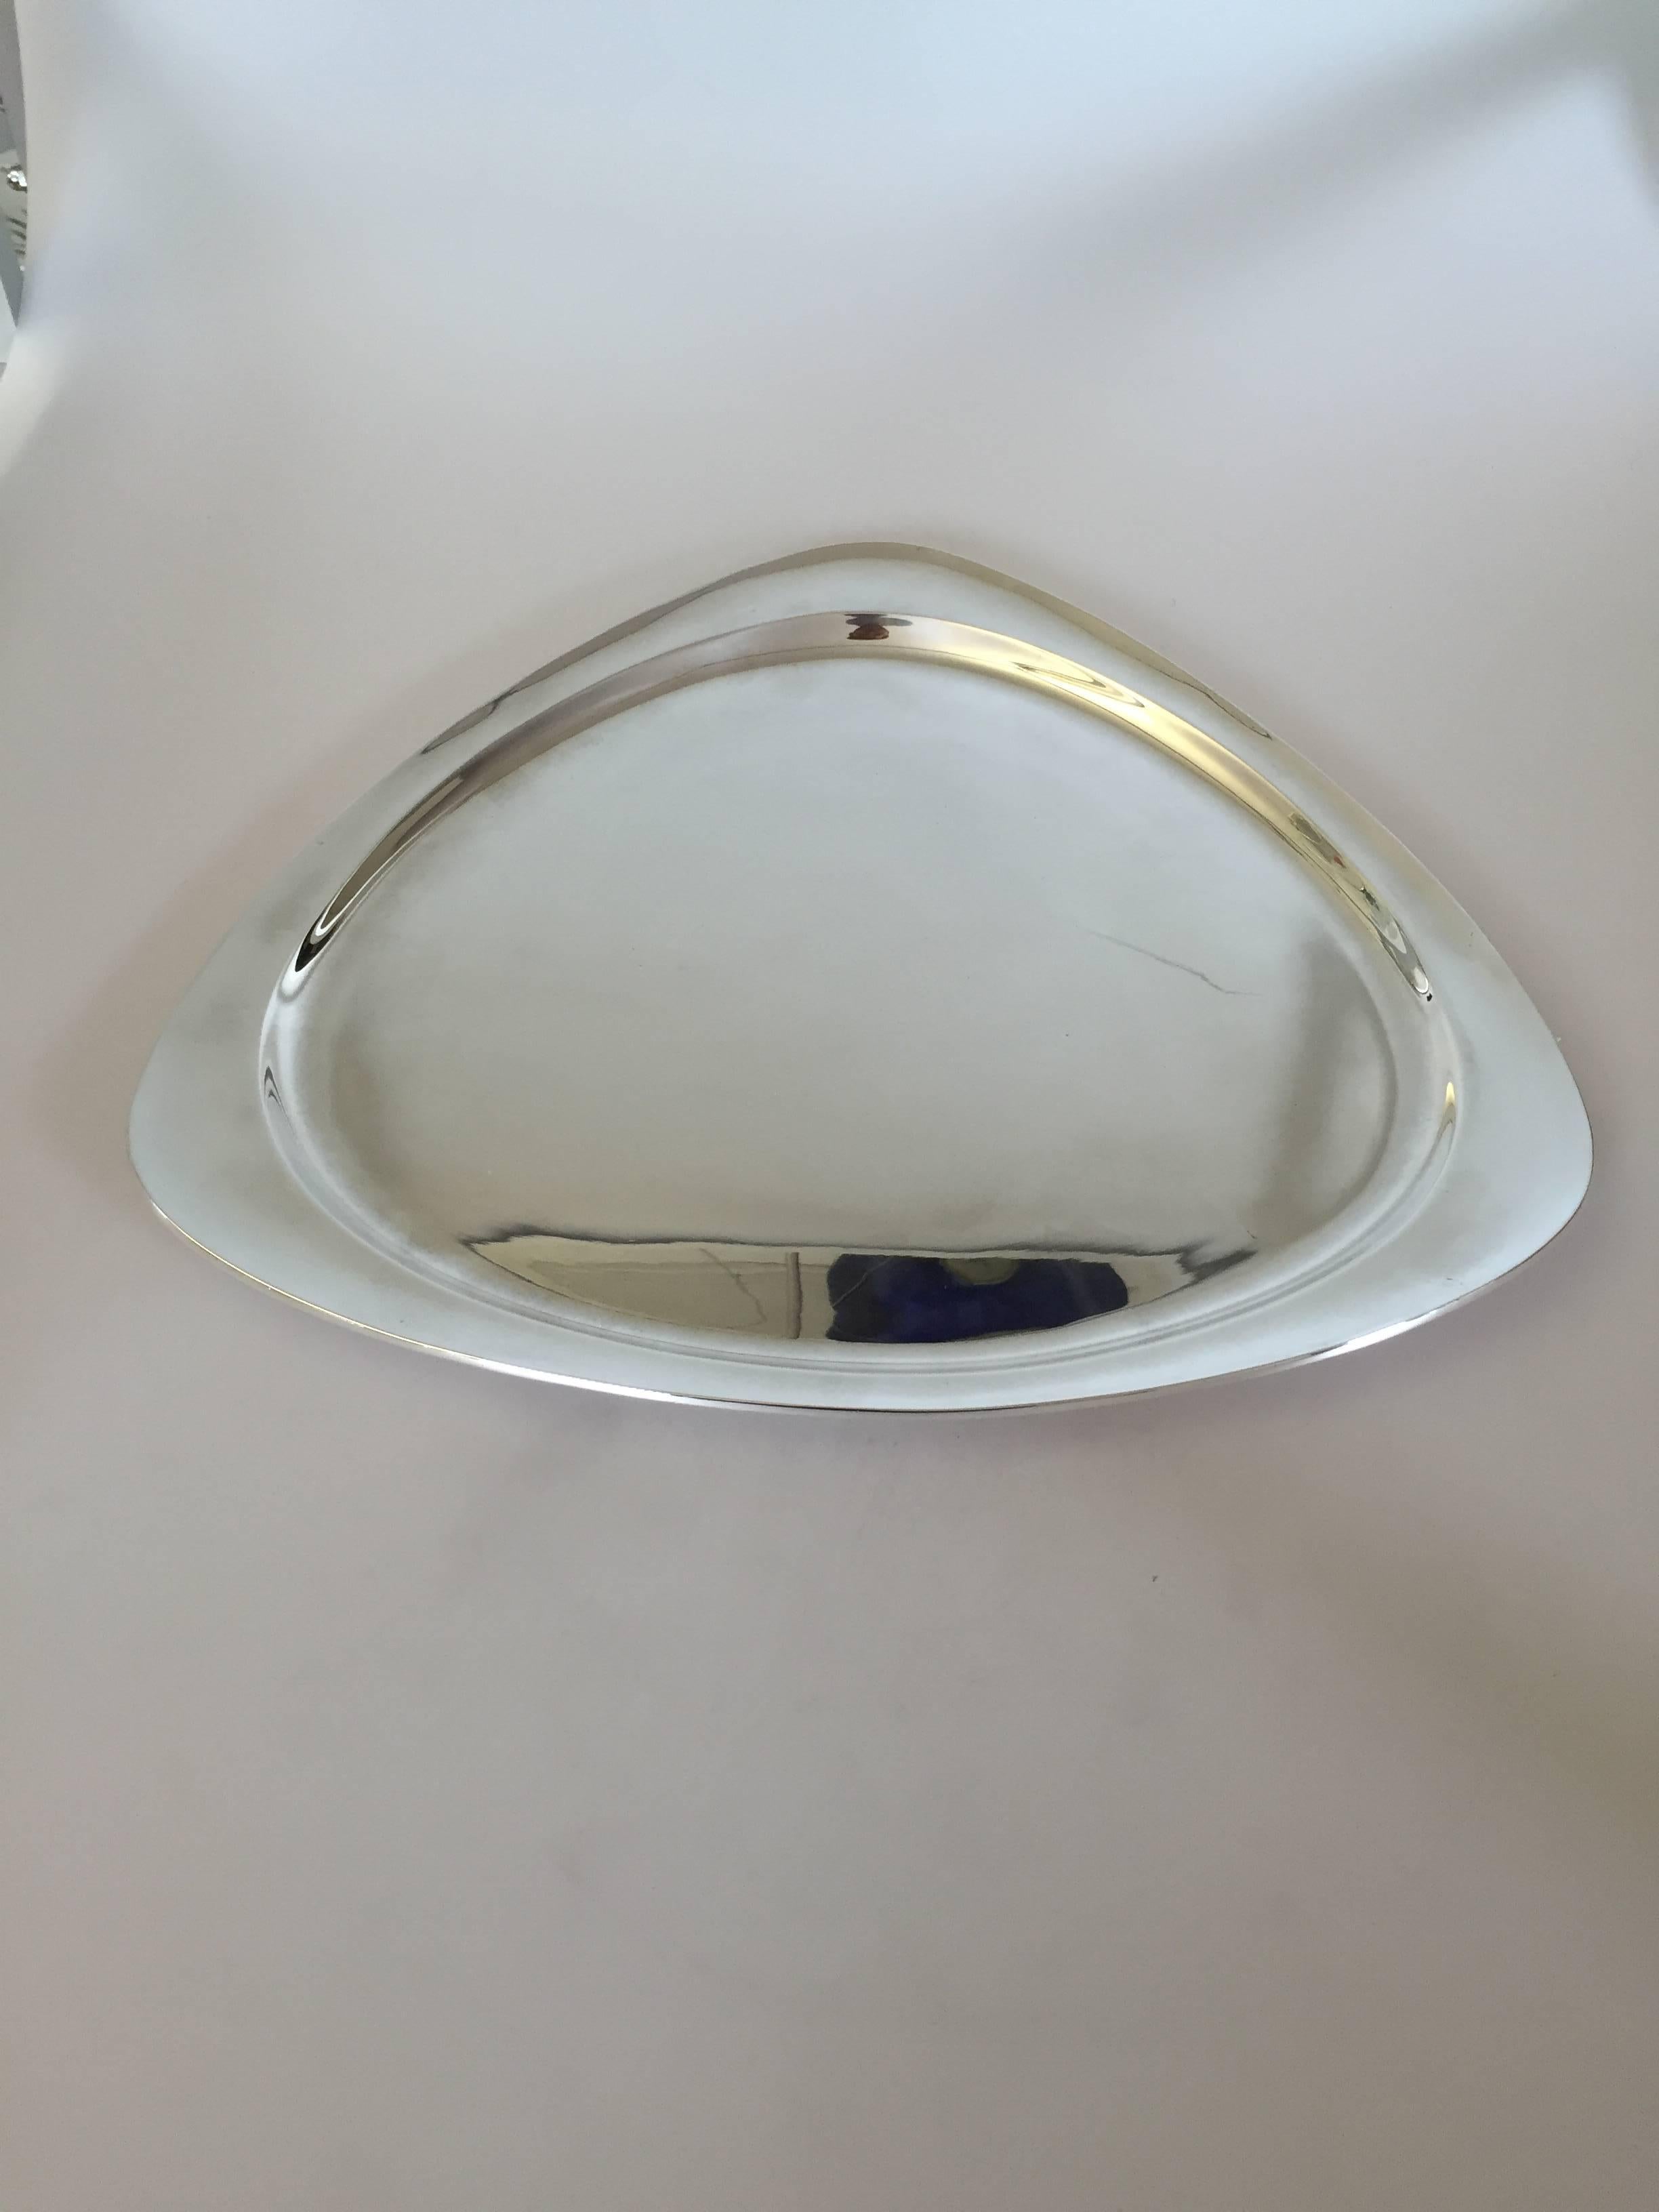 Cohr sterling silver Hans Bunde large tray. Measures 35 cm in diameter. In a good condition.

Cohr was a Danish manufacturer of stainless steel and silverware. The company was founded in 1906 and produced items until 1987. Hans Bunde was a Danish